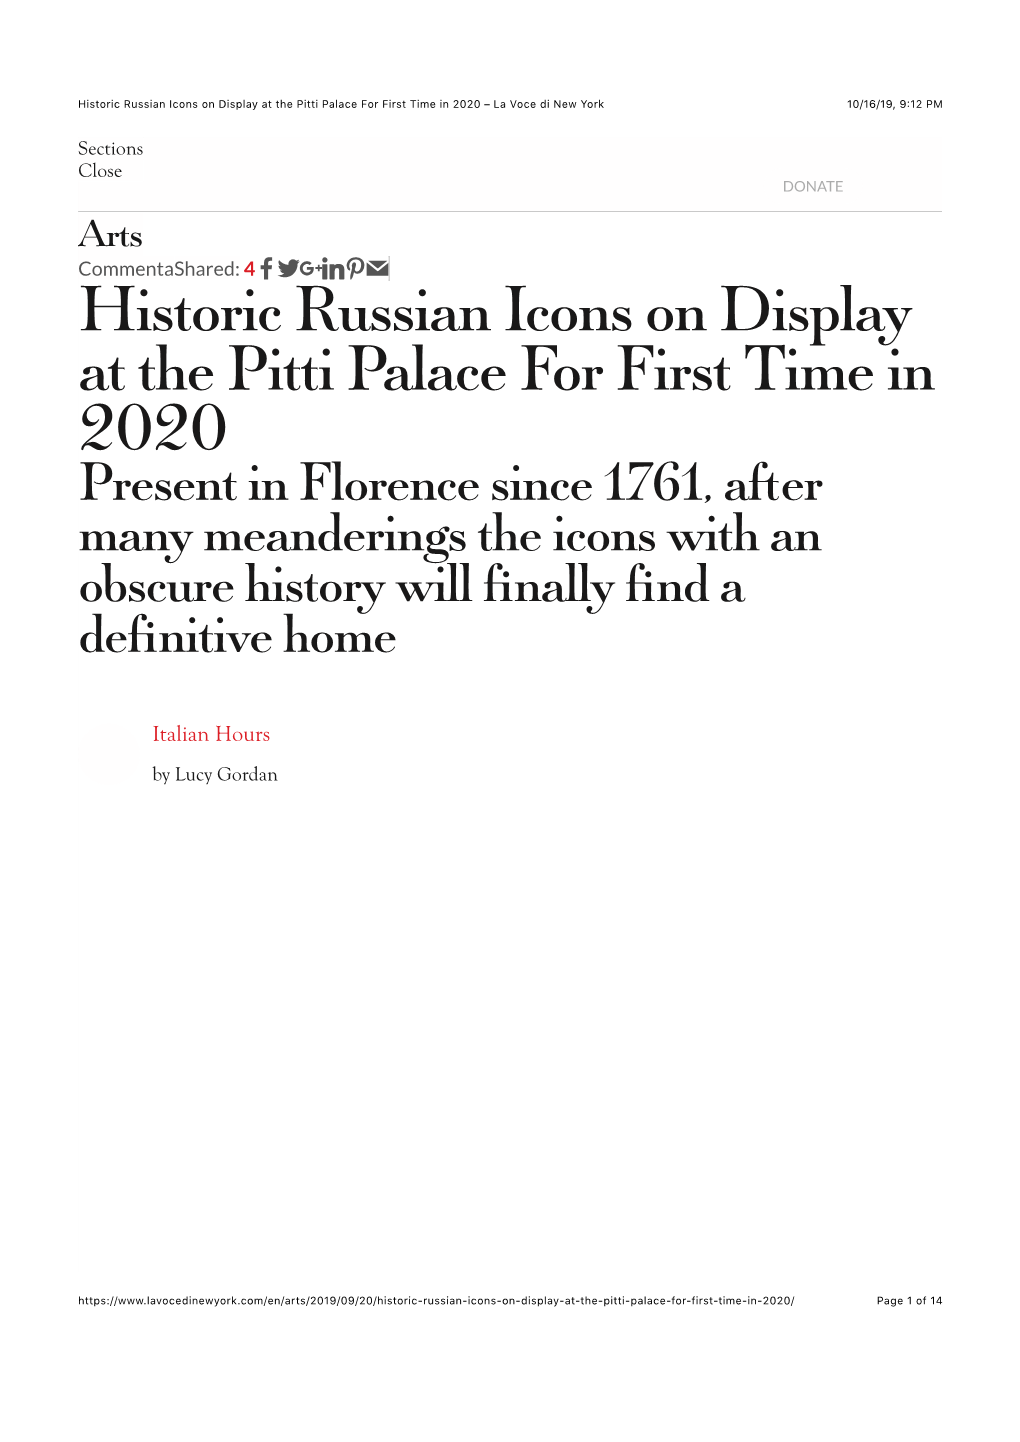 Historic Russian Icons on Display at the Pitti Palace for First Time in 2020 – La Voce Di New York 10/16/19, 9(12 PM